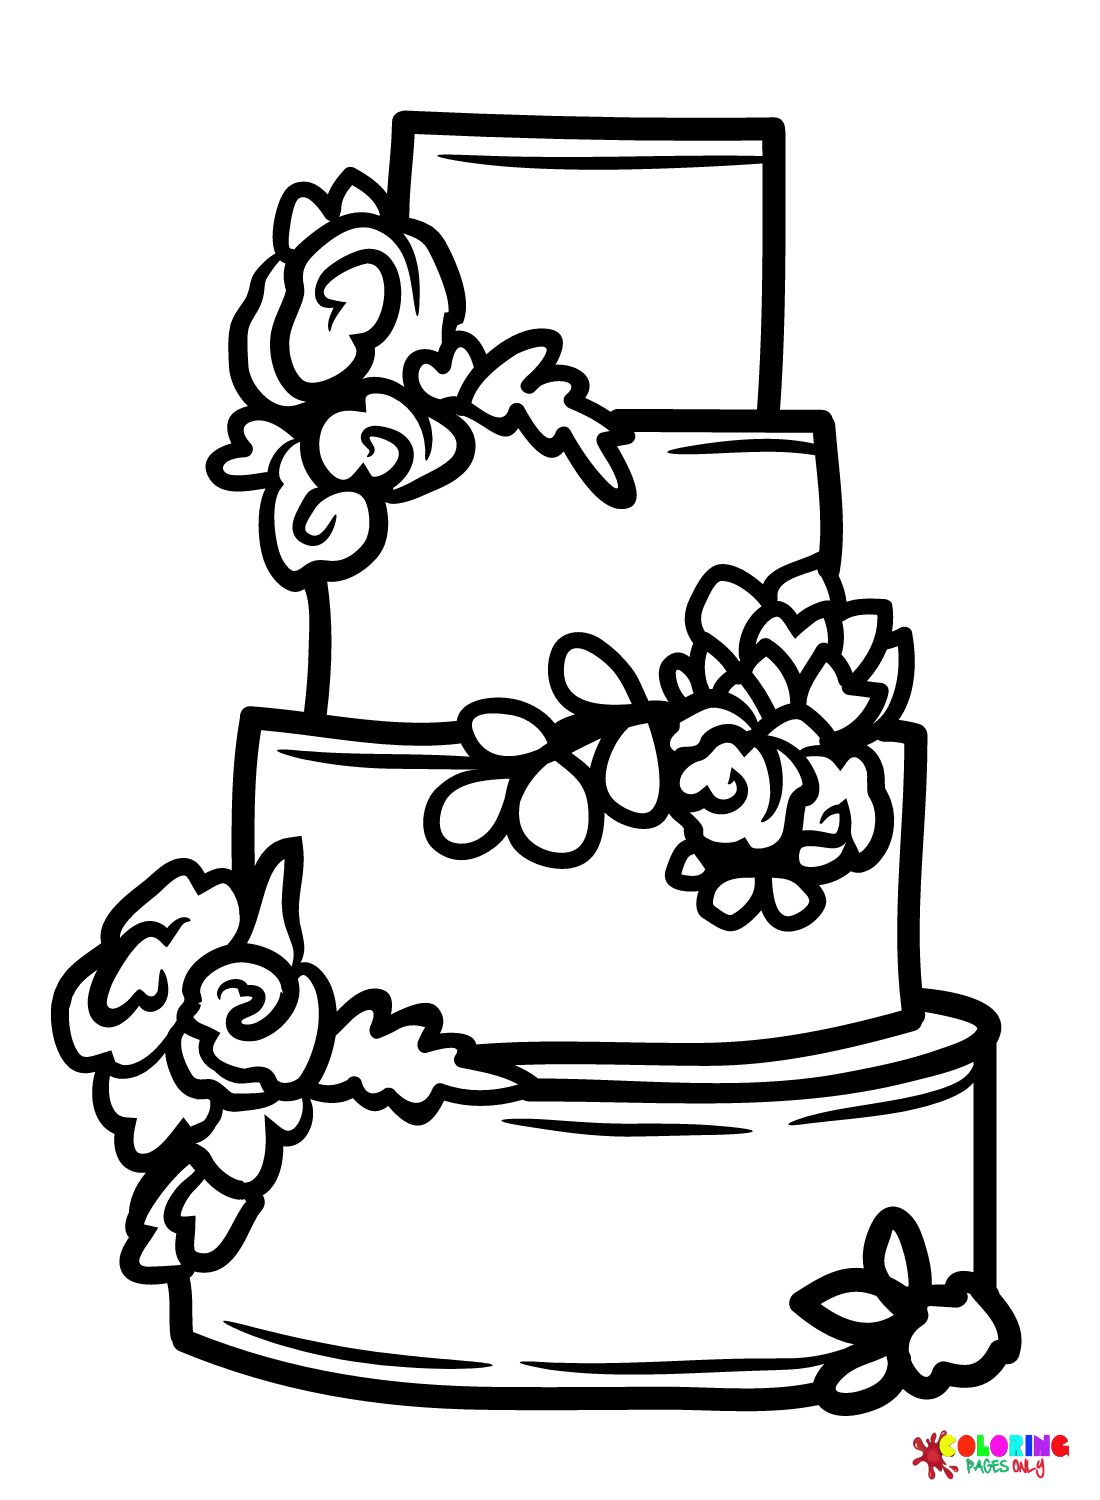 Wedding Cake Images Coloring Page